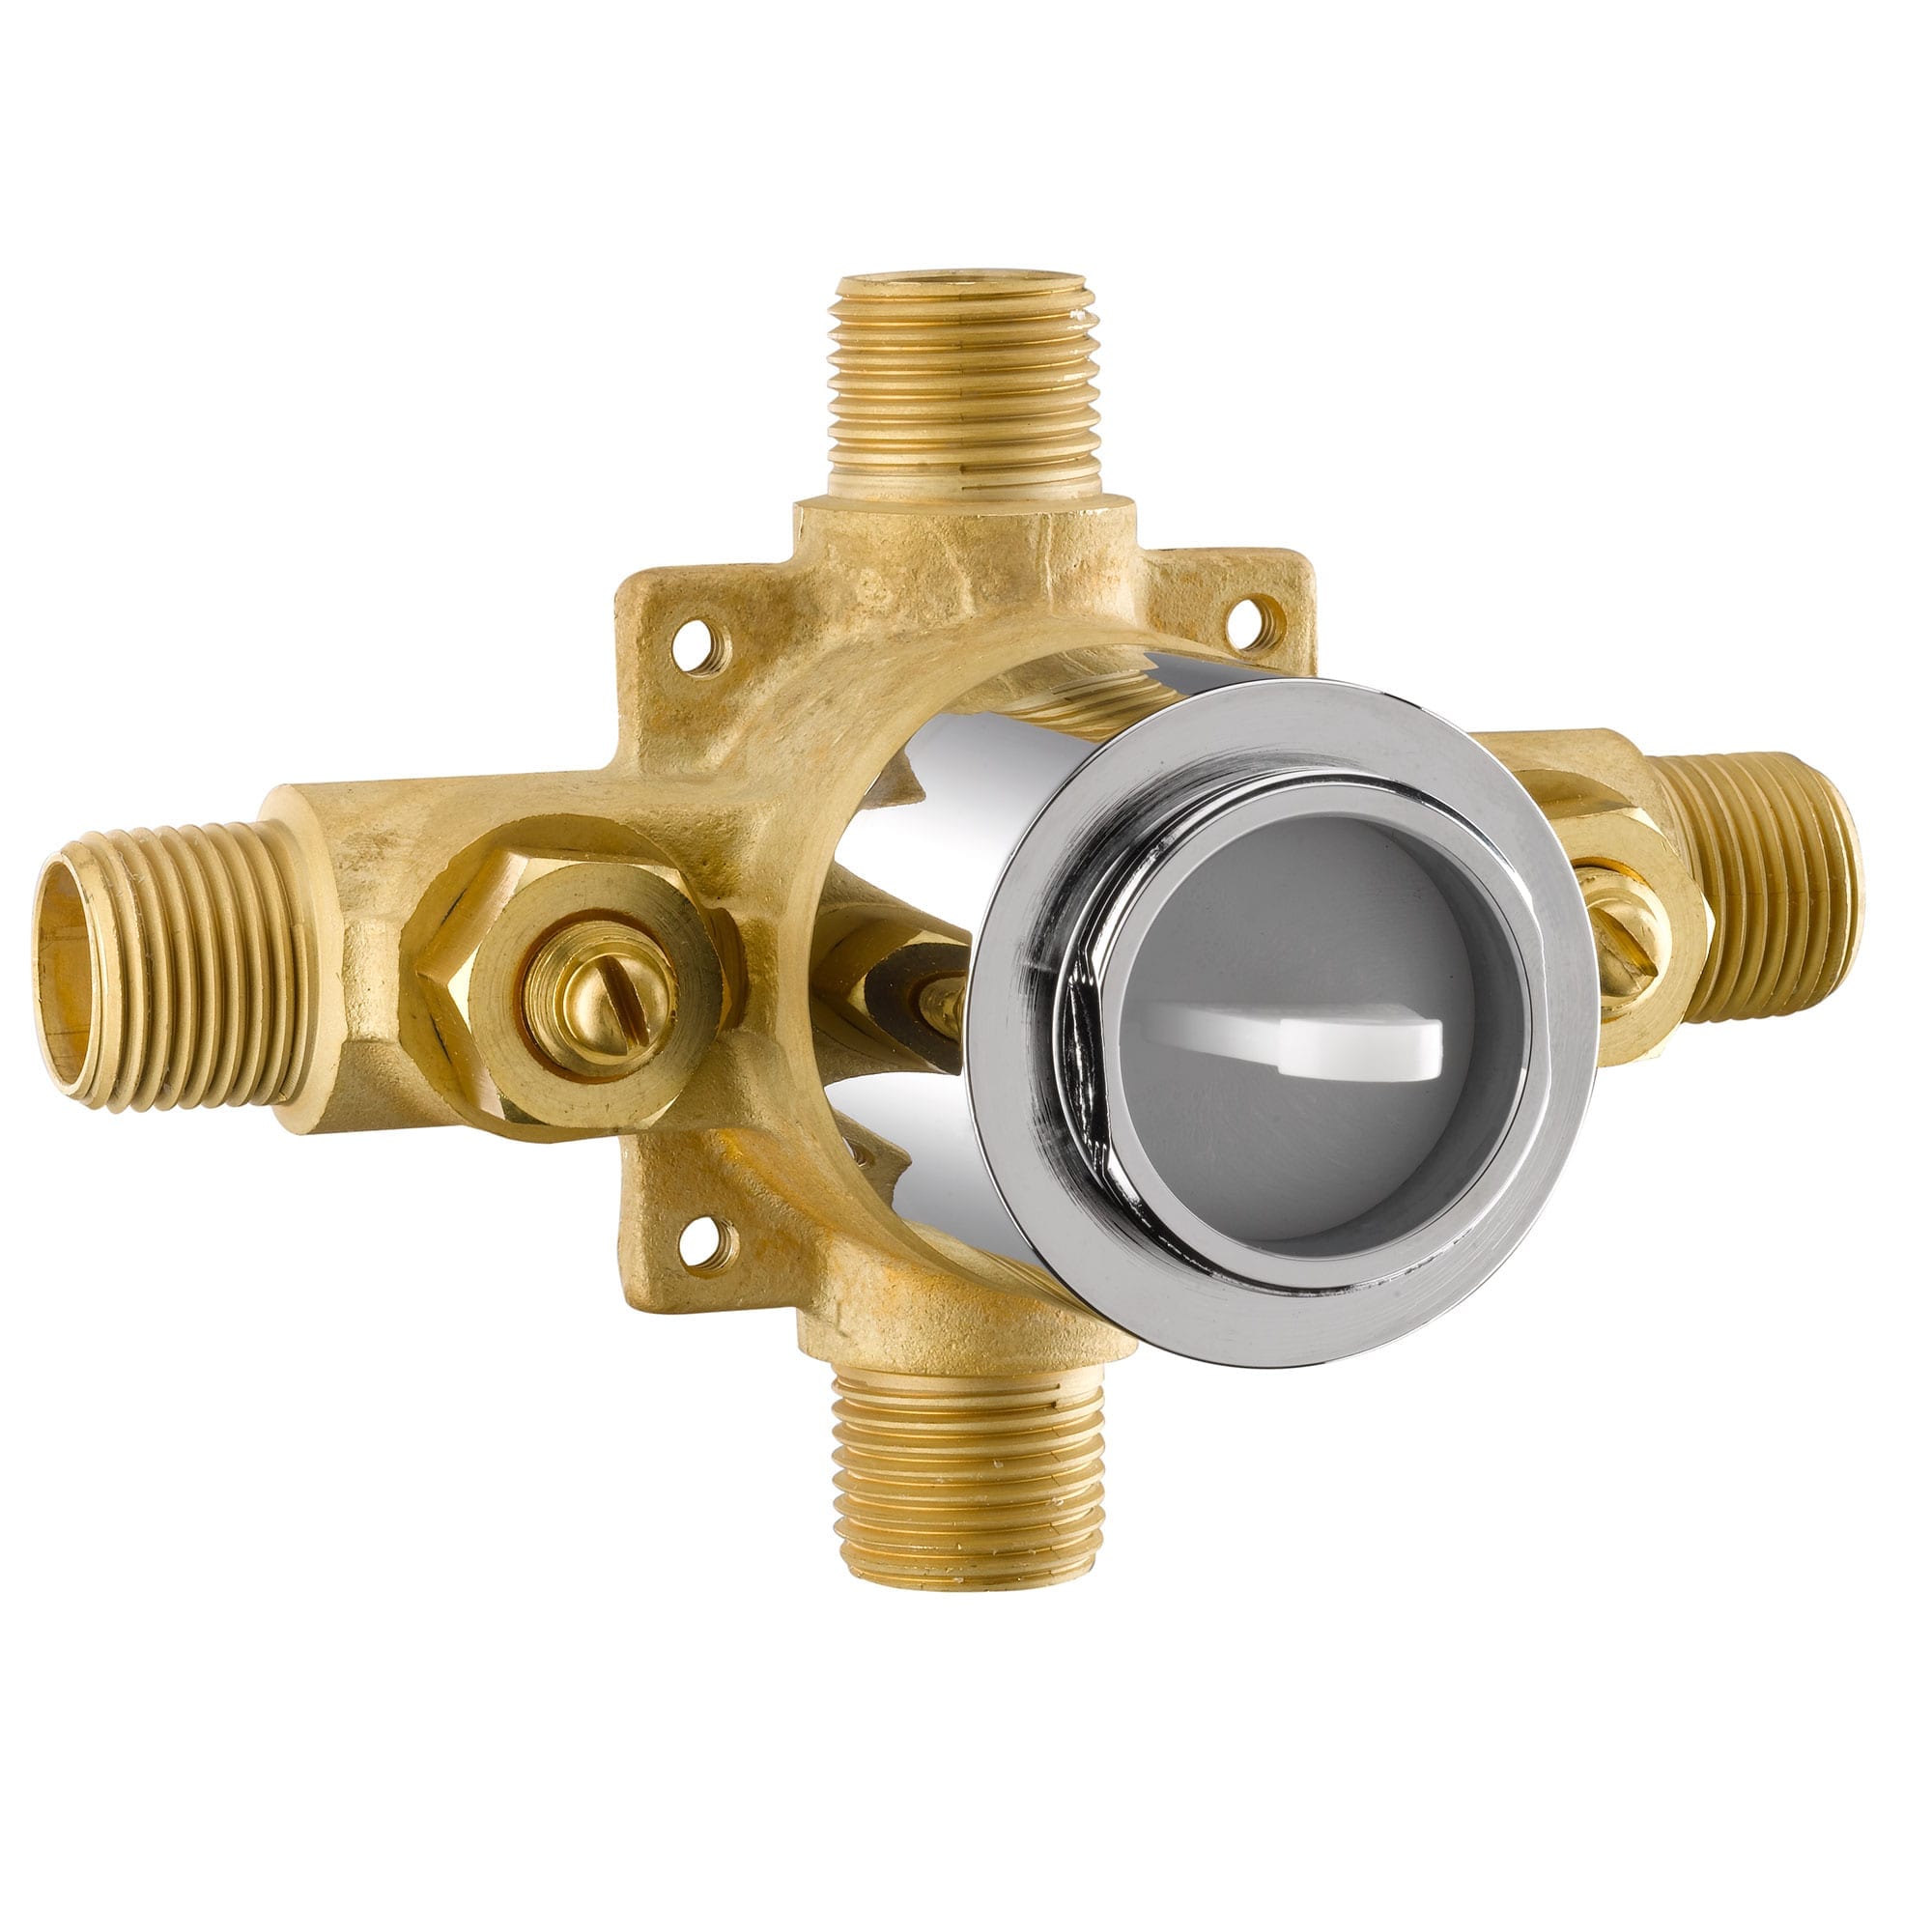 Bélanger 90VSR- Pb Rough-In Valve For Copper Connection W/Check Stops